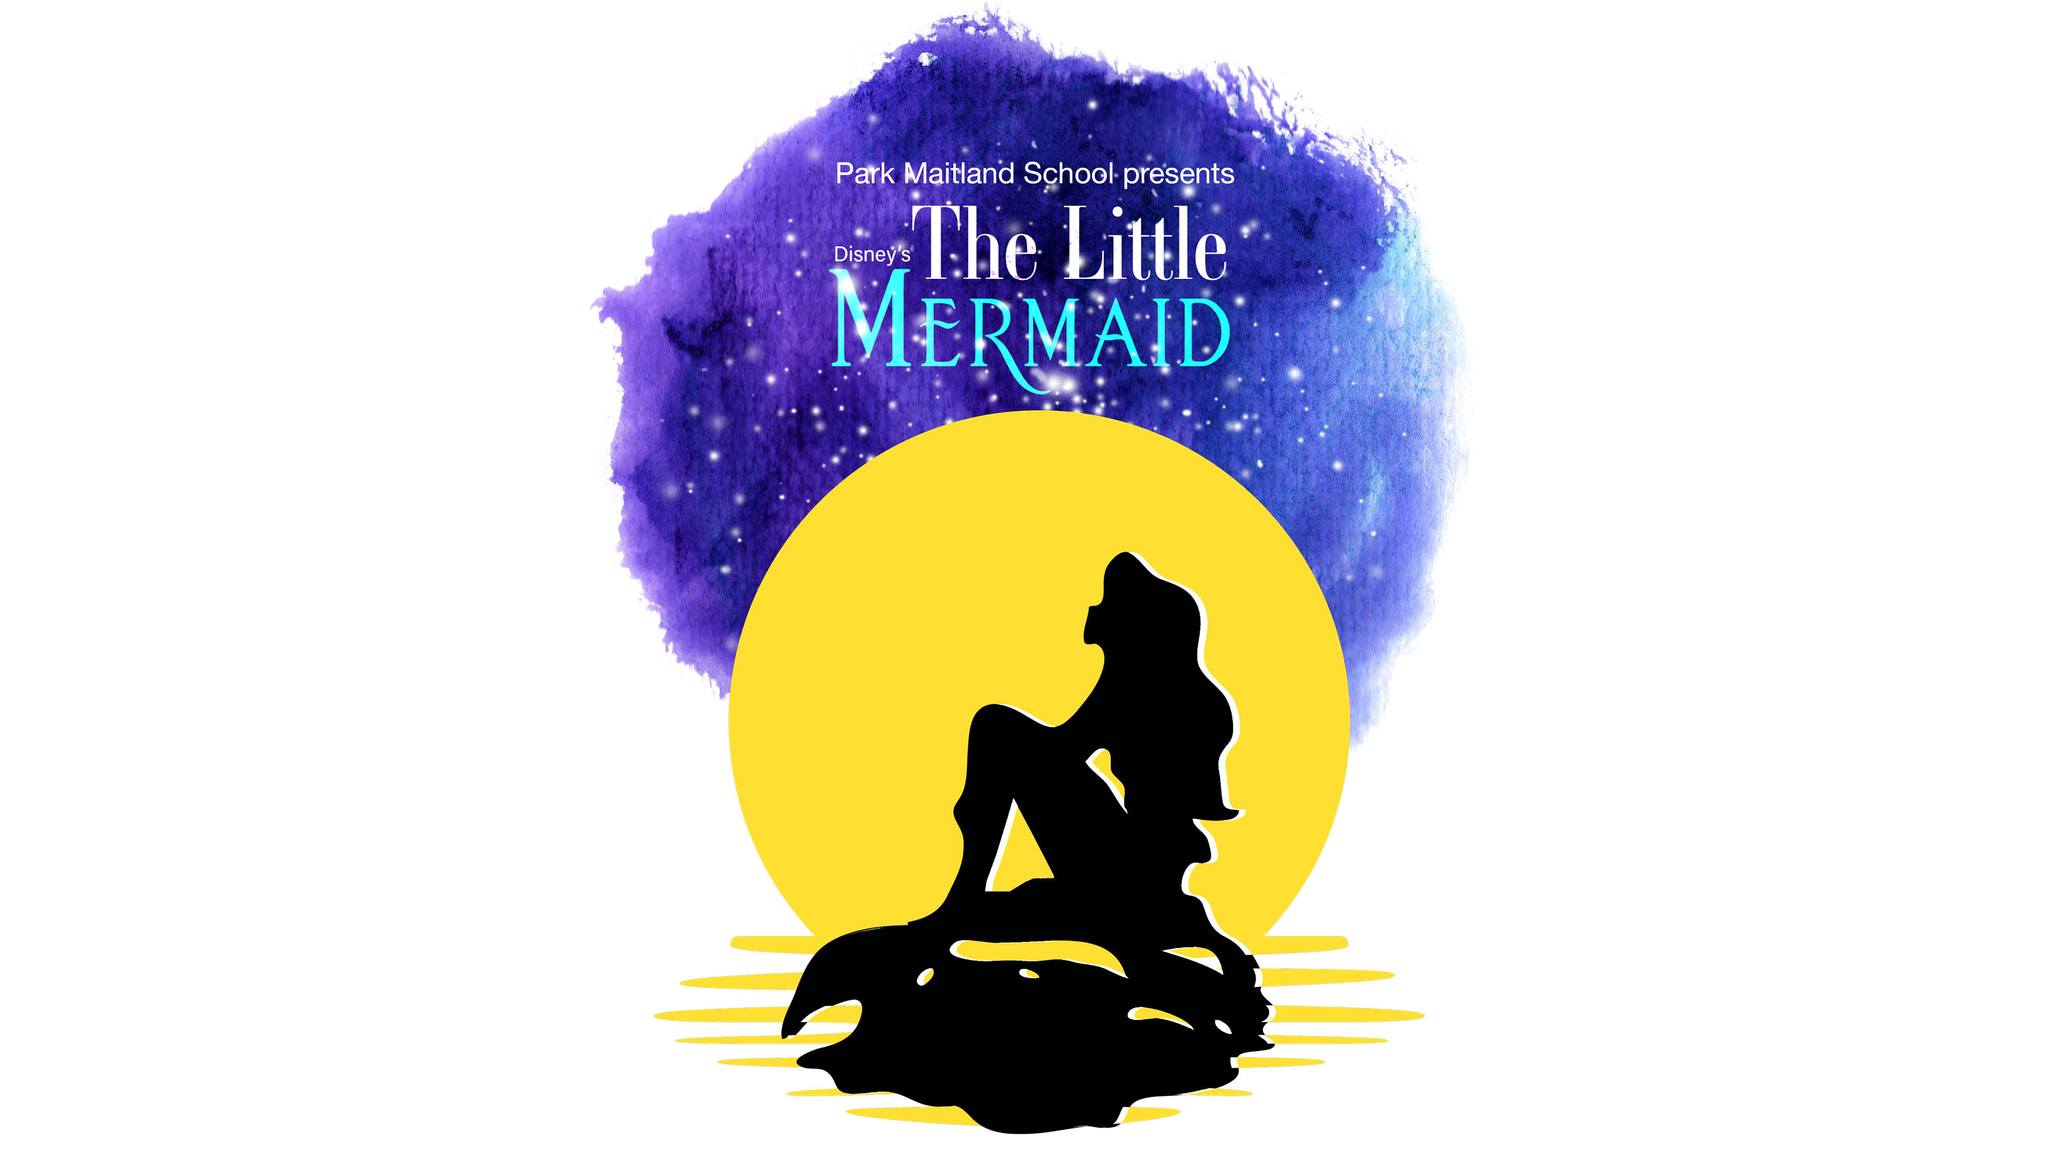 Disney's The Little Mermaid at Dr. Phillips Center for the Performing Arts